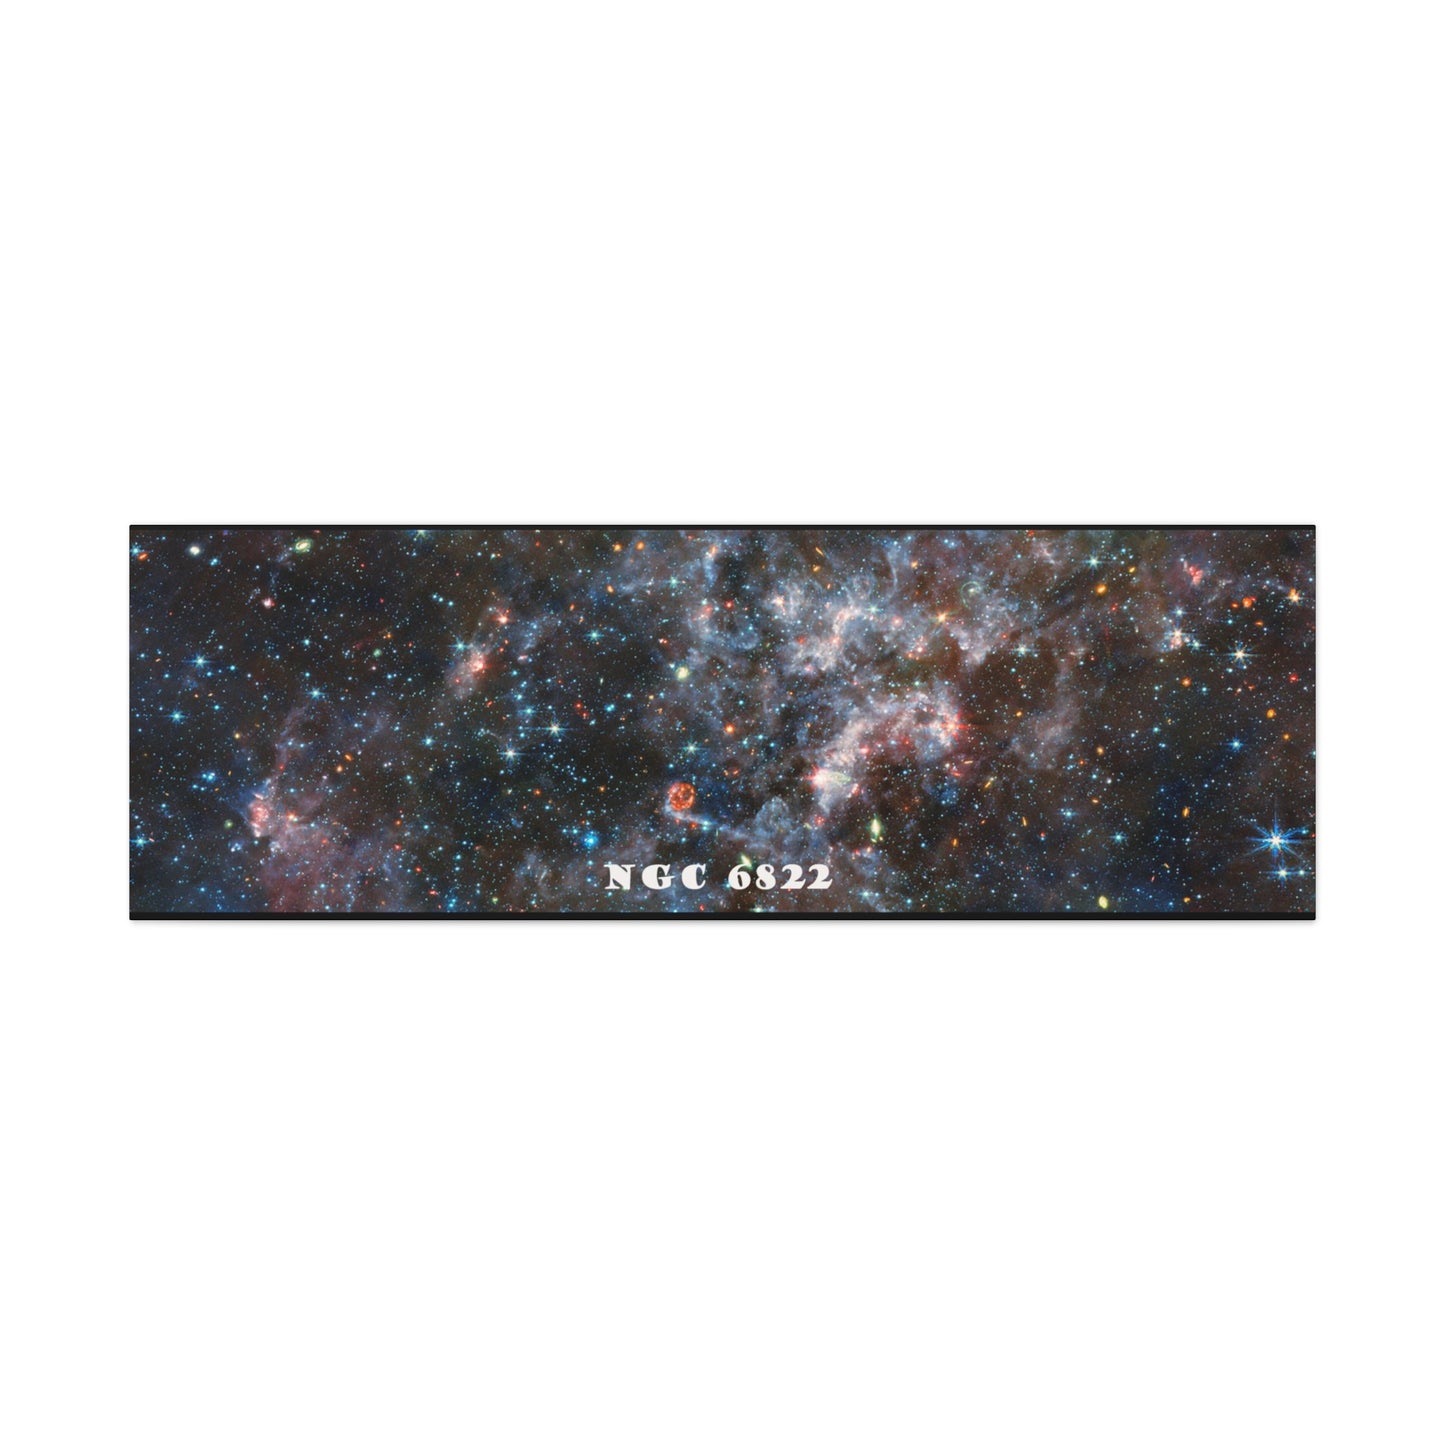 Cosmos Series  21 Canvas Art: Bring the Universe into Your Home